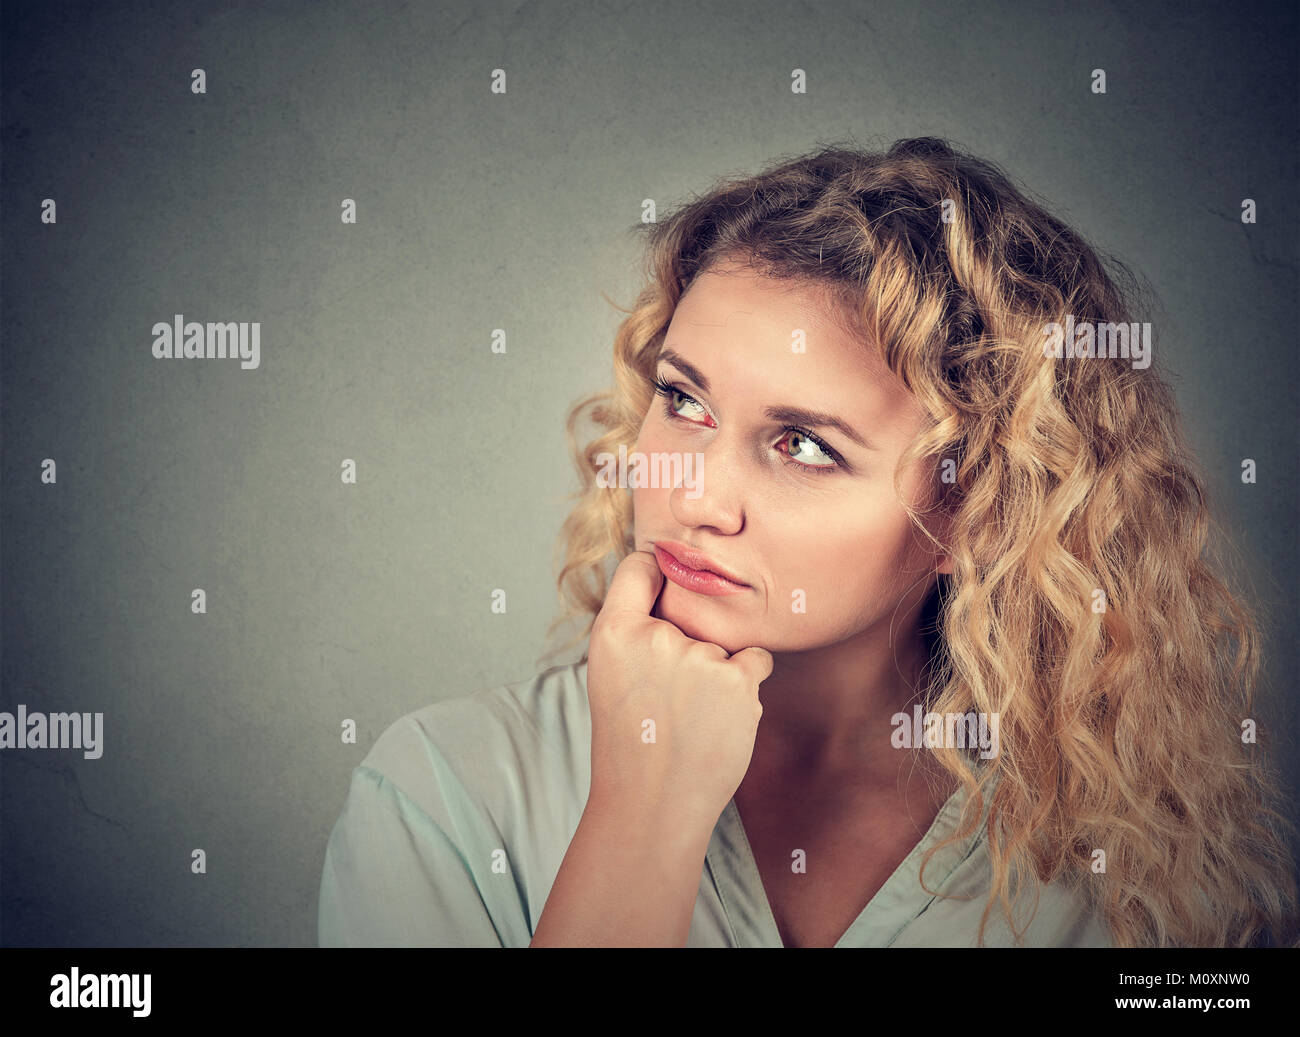 Young curly model looking away pensively while daydreaming on gray backdrop. Stock Photo